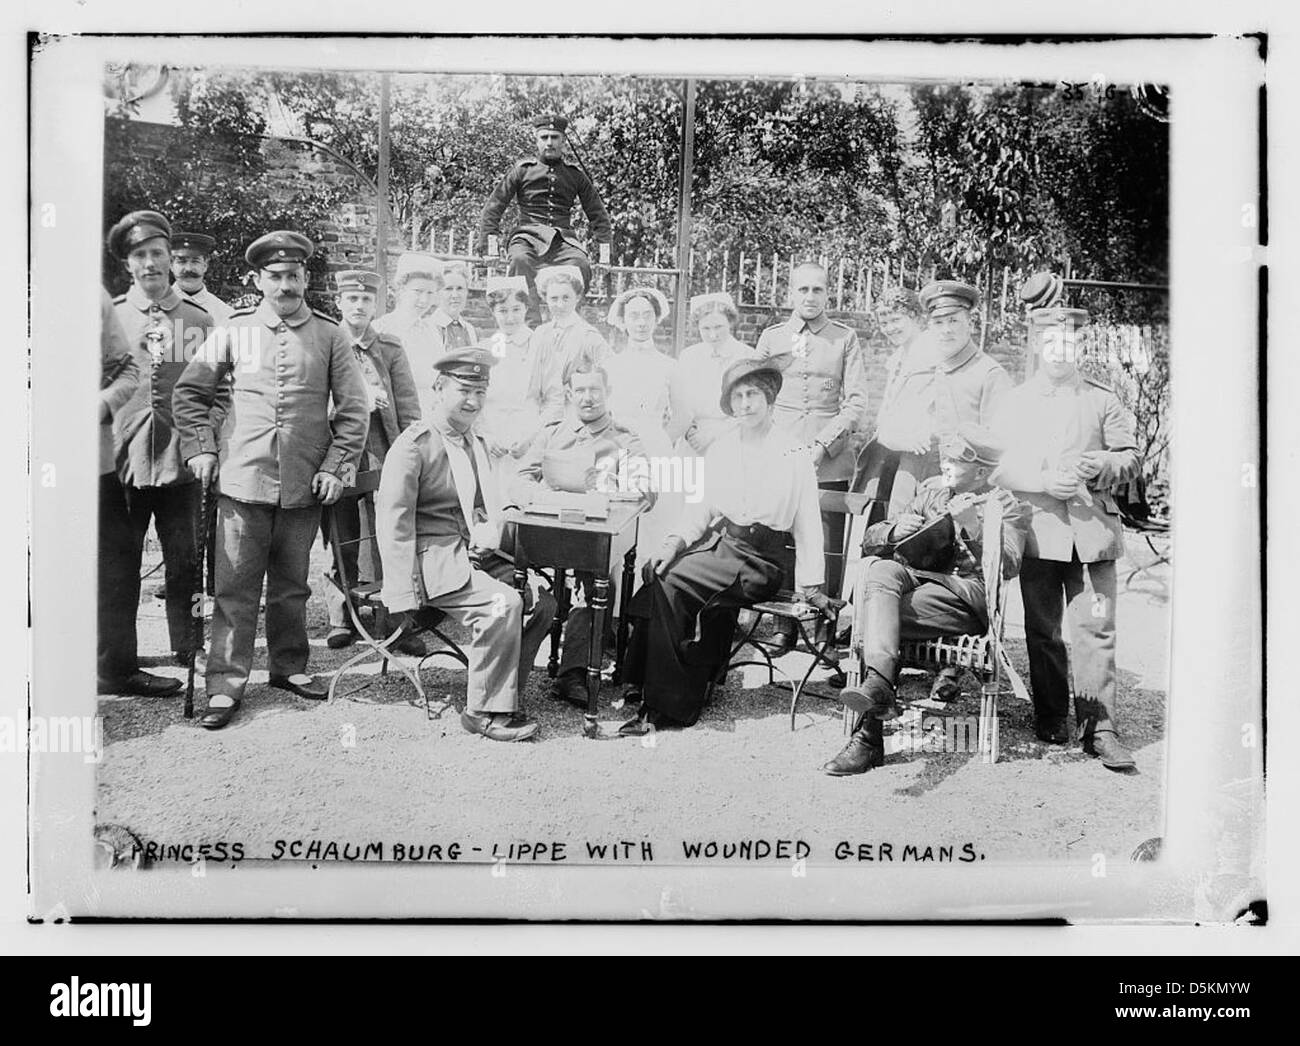 Princess Schaumburg-Lippe [Kaiser's sister] with wounded Germans (LOC) Stock Photo